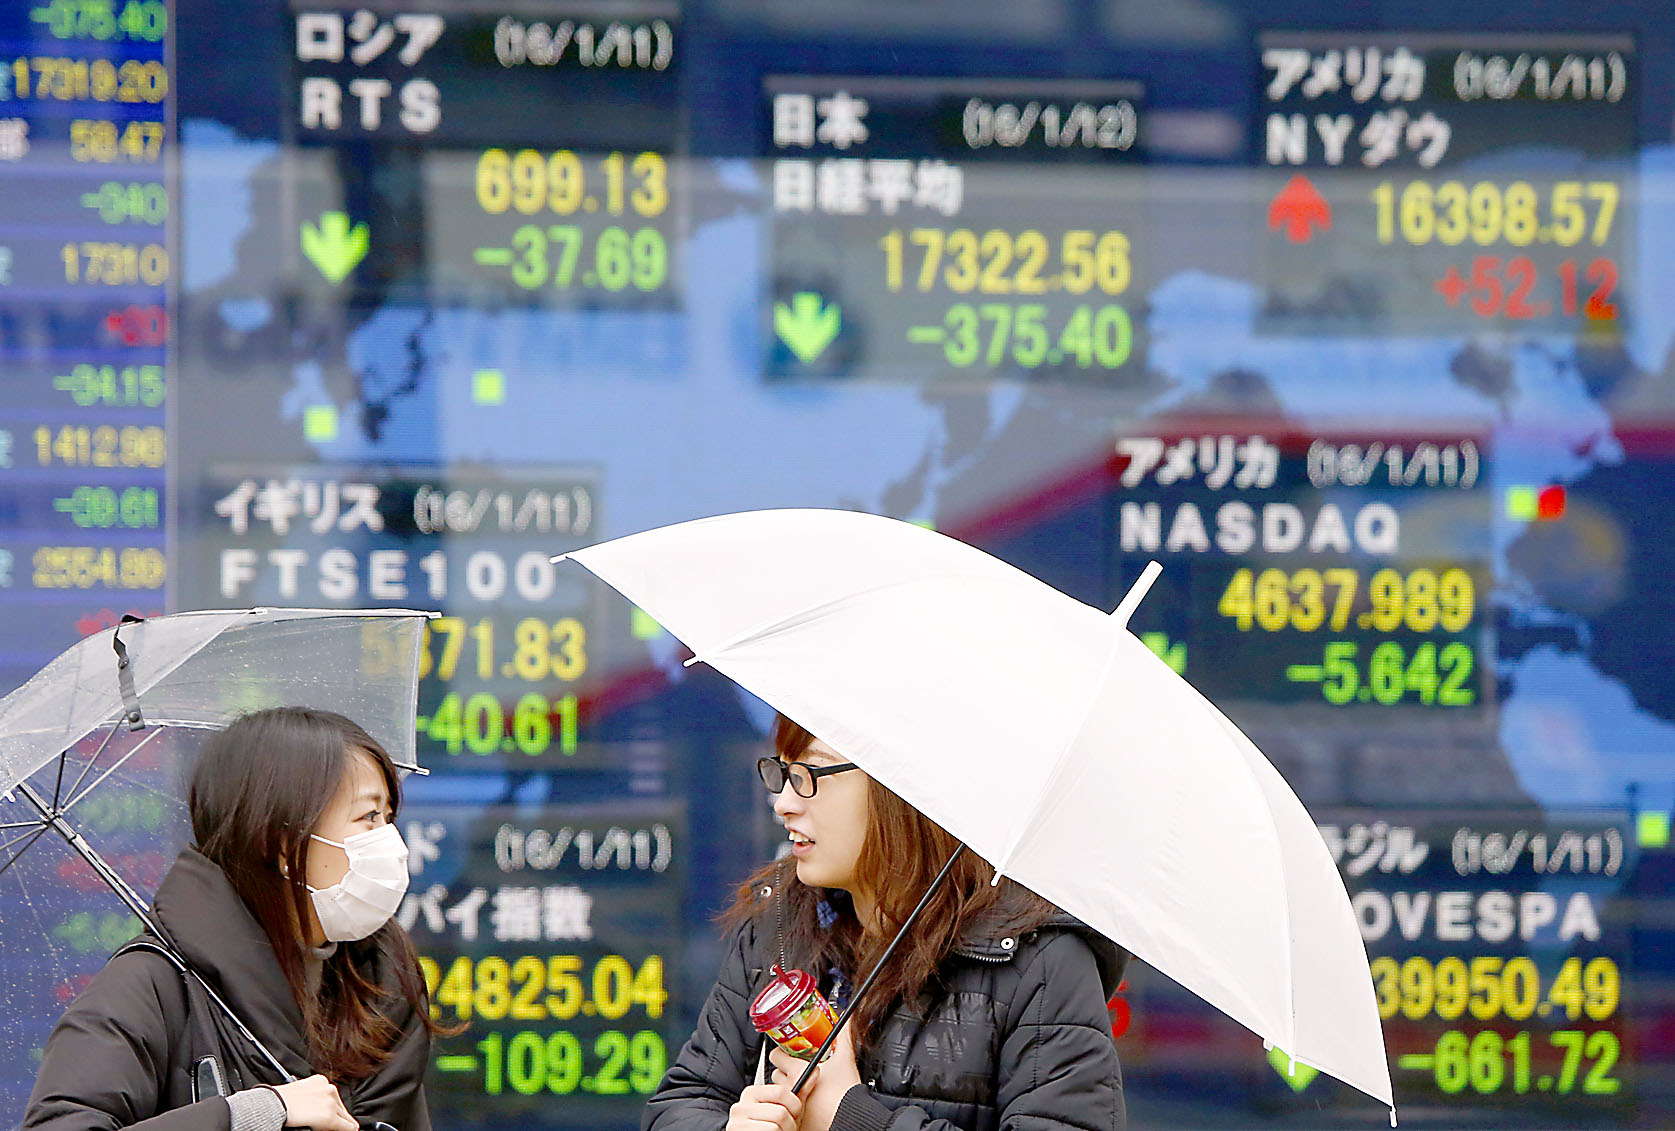 Women chat in from of an electronic stock indicator of a securities firm in Tokyo, Tuesday, Jan. 12, 2016. Chinese stocks seesawed Tuesday as worries lingered over the country's financial markets and economic outlook, fueling volatility in other Asian benchmarks. (AP Photo/Shizuo Kambayashi)